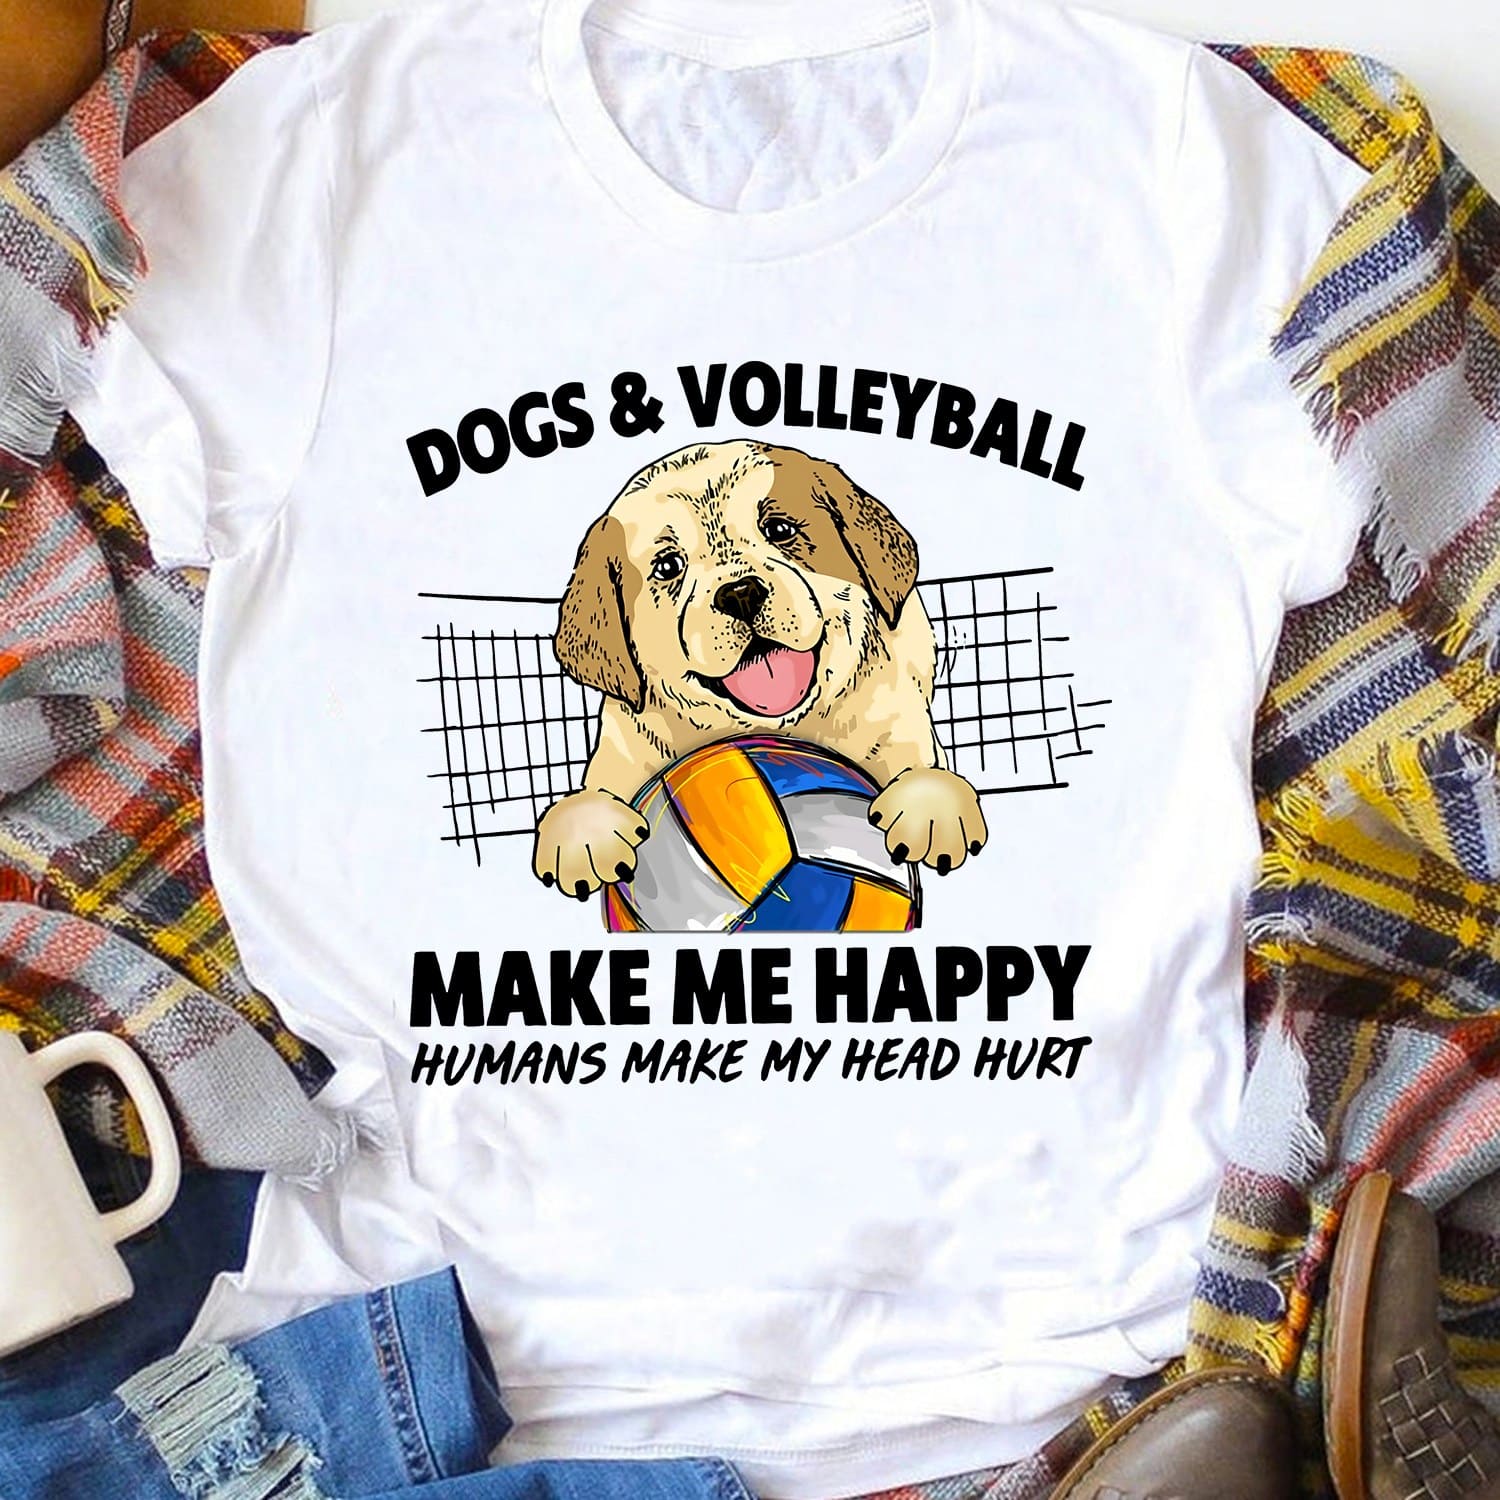 Dogs and volleyball make me happy, humans make my head hurt - Volleyball player T-shirt